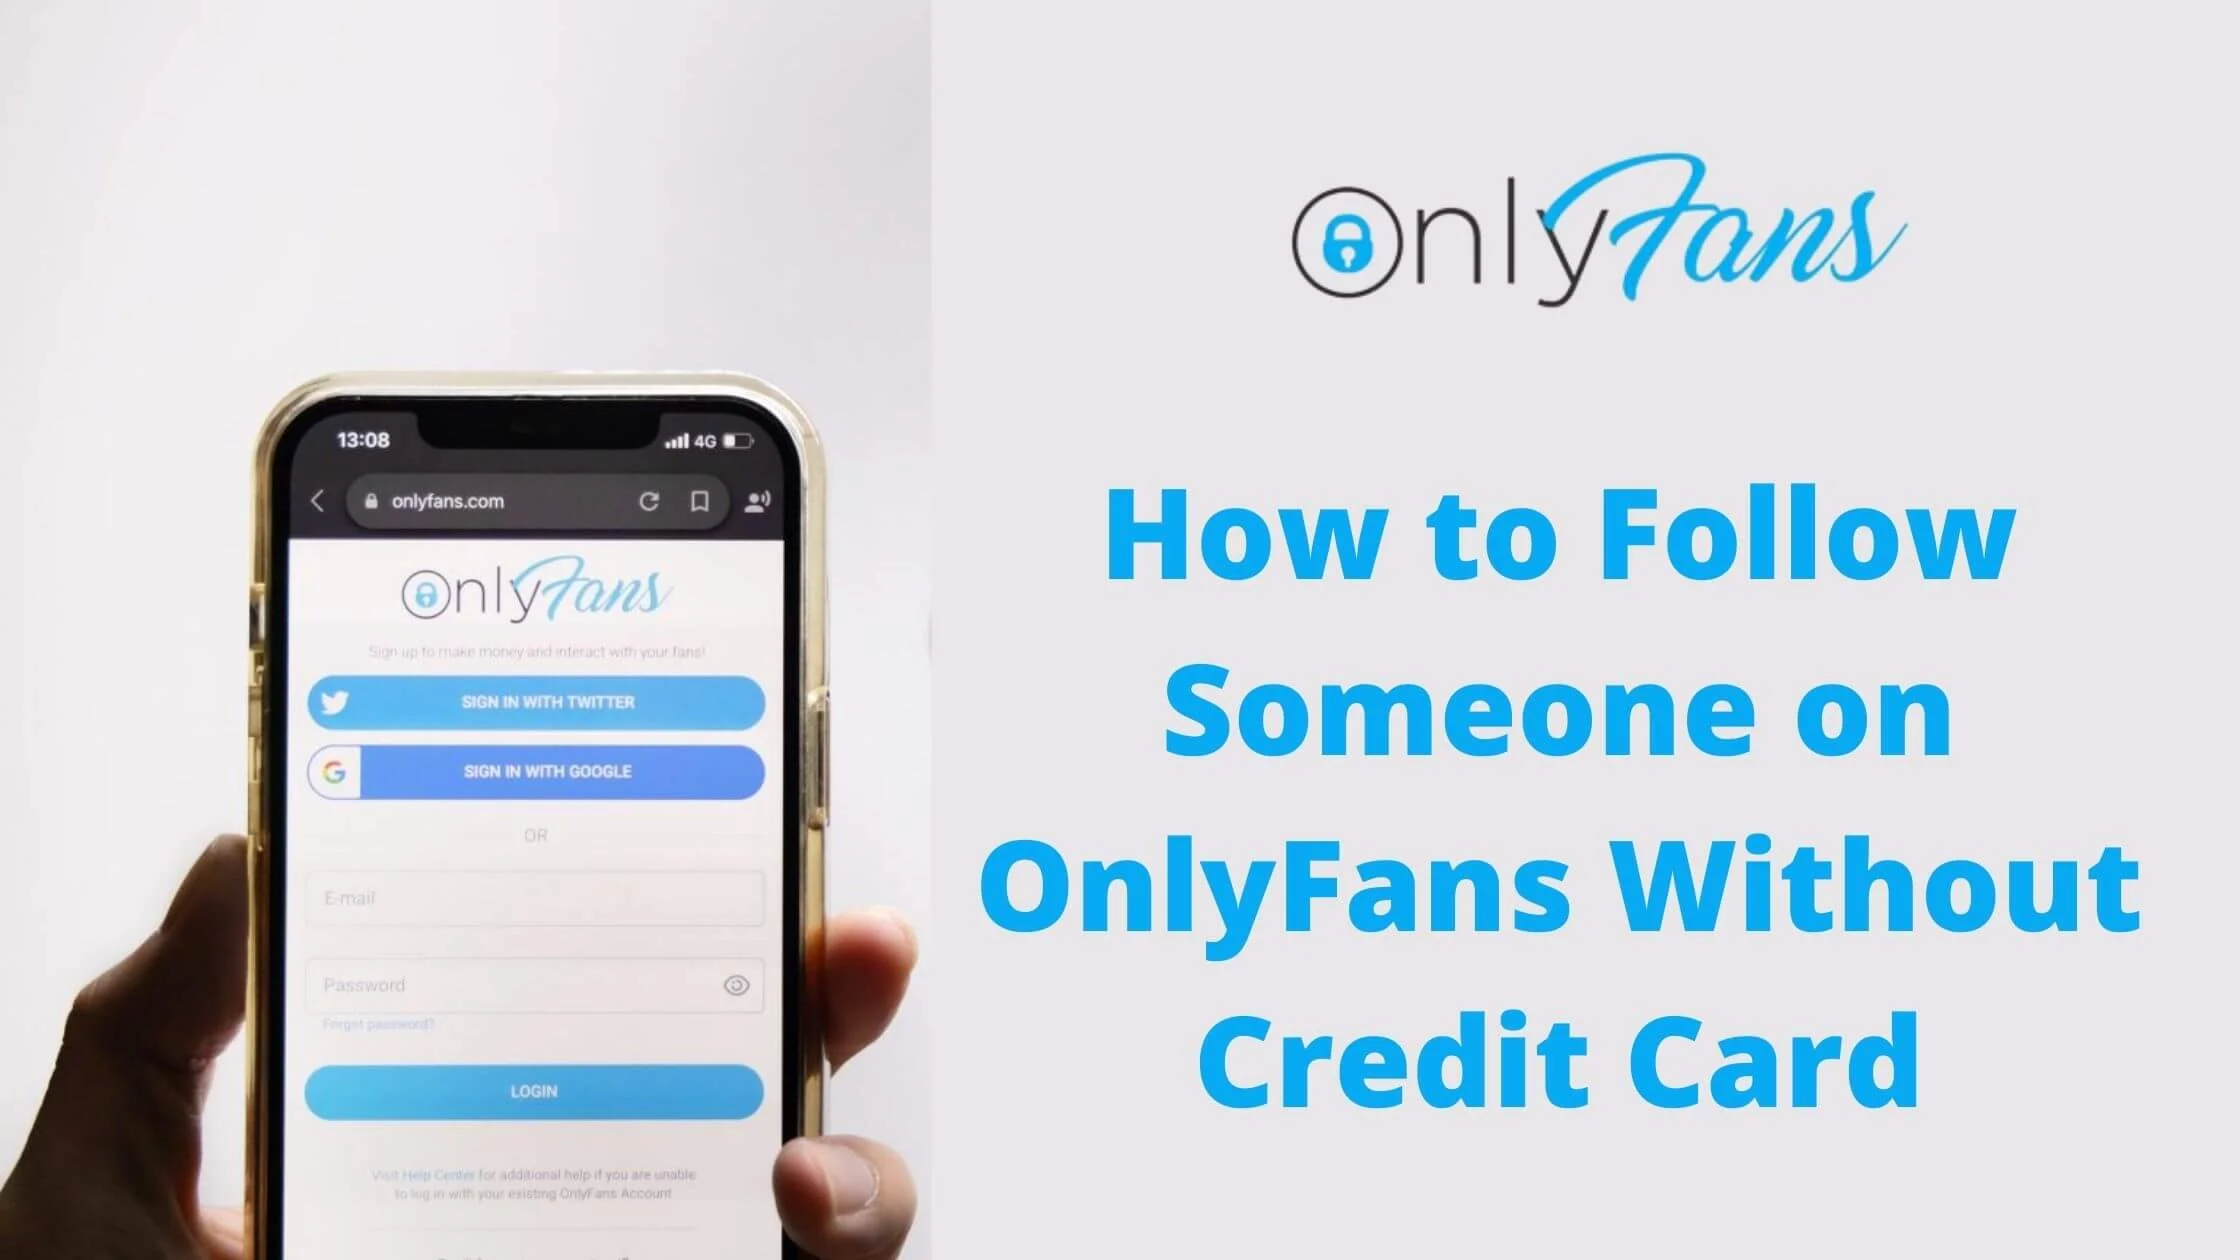 How to unsubscribe to someone on onlyfans